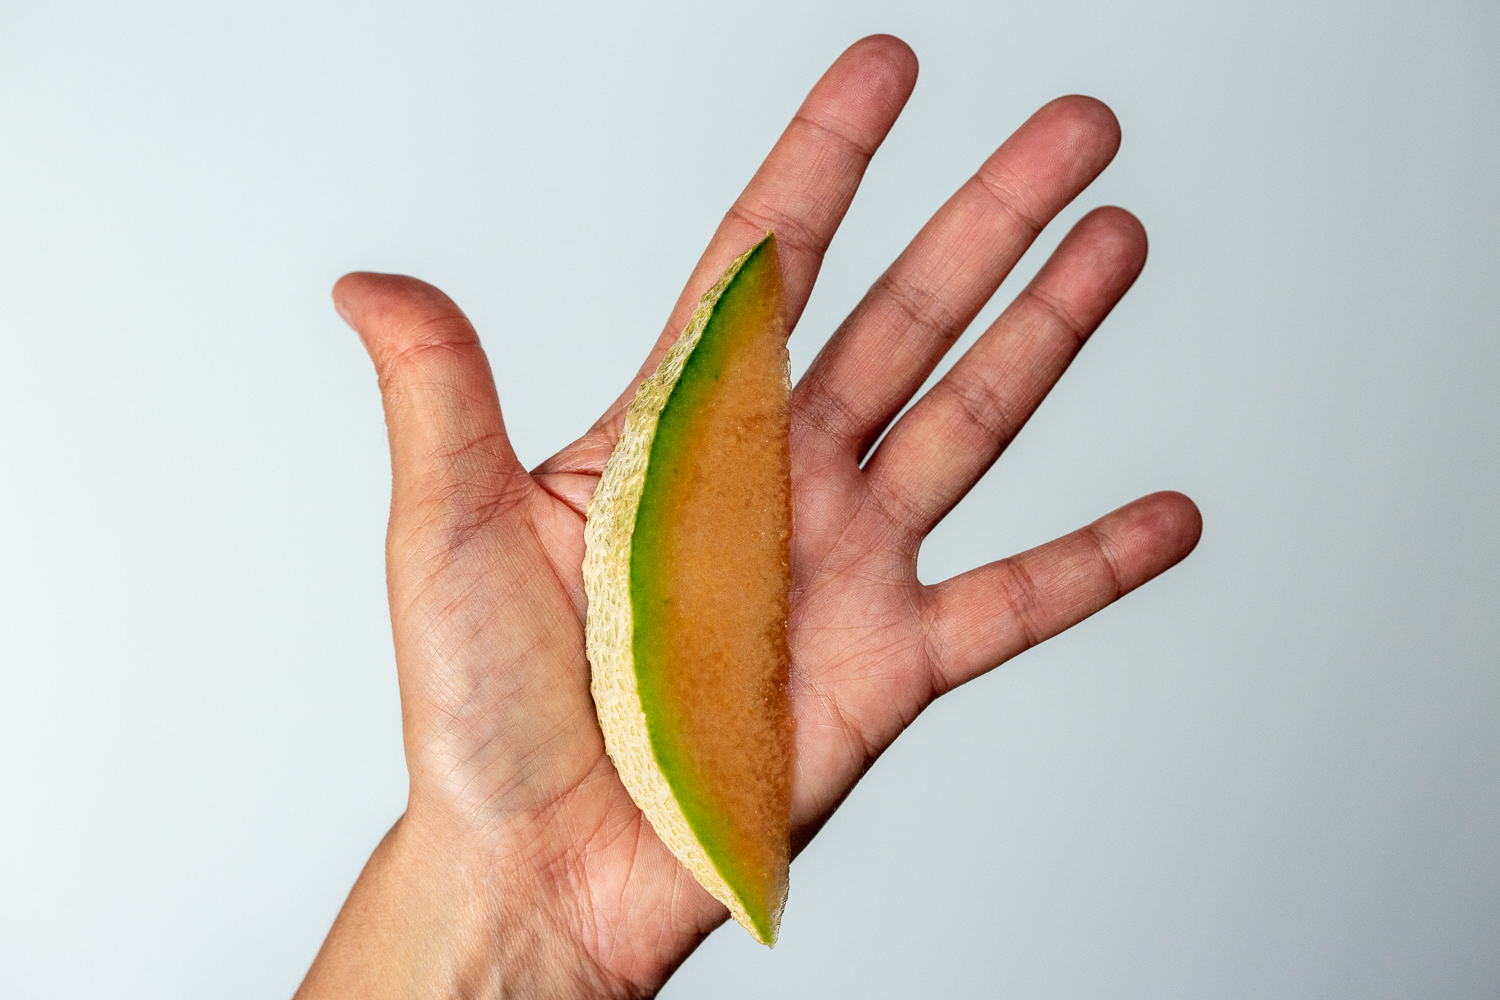 a hand holding a wedge of cantaloupe with the rind on